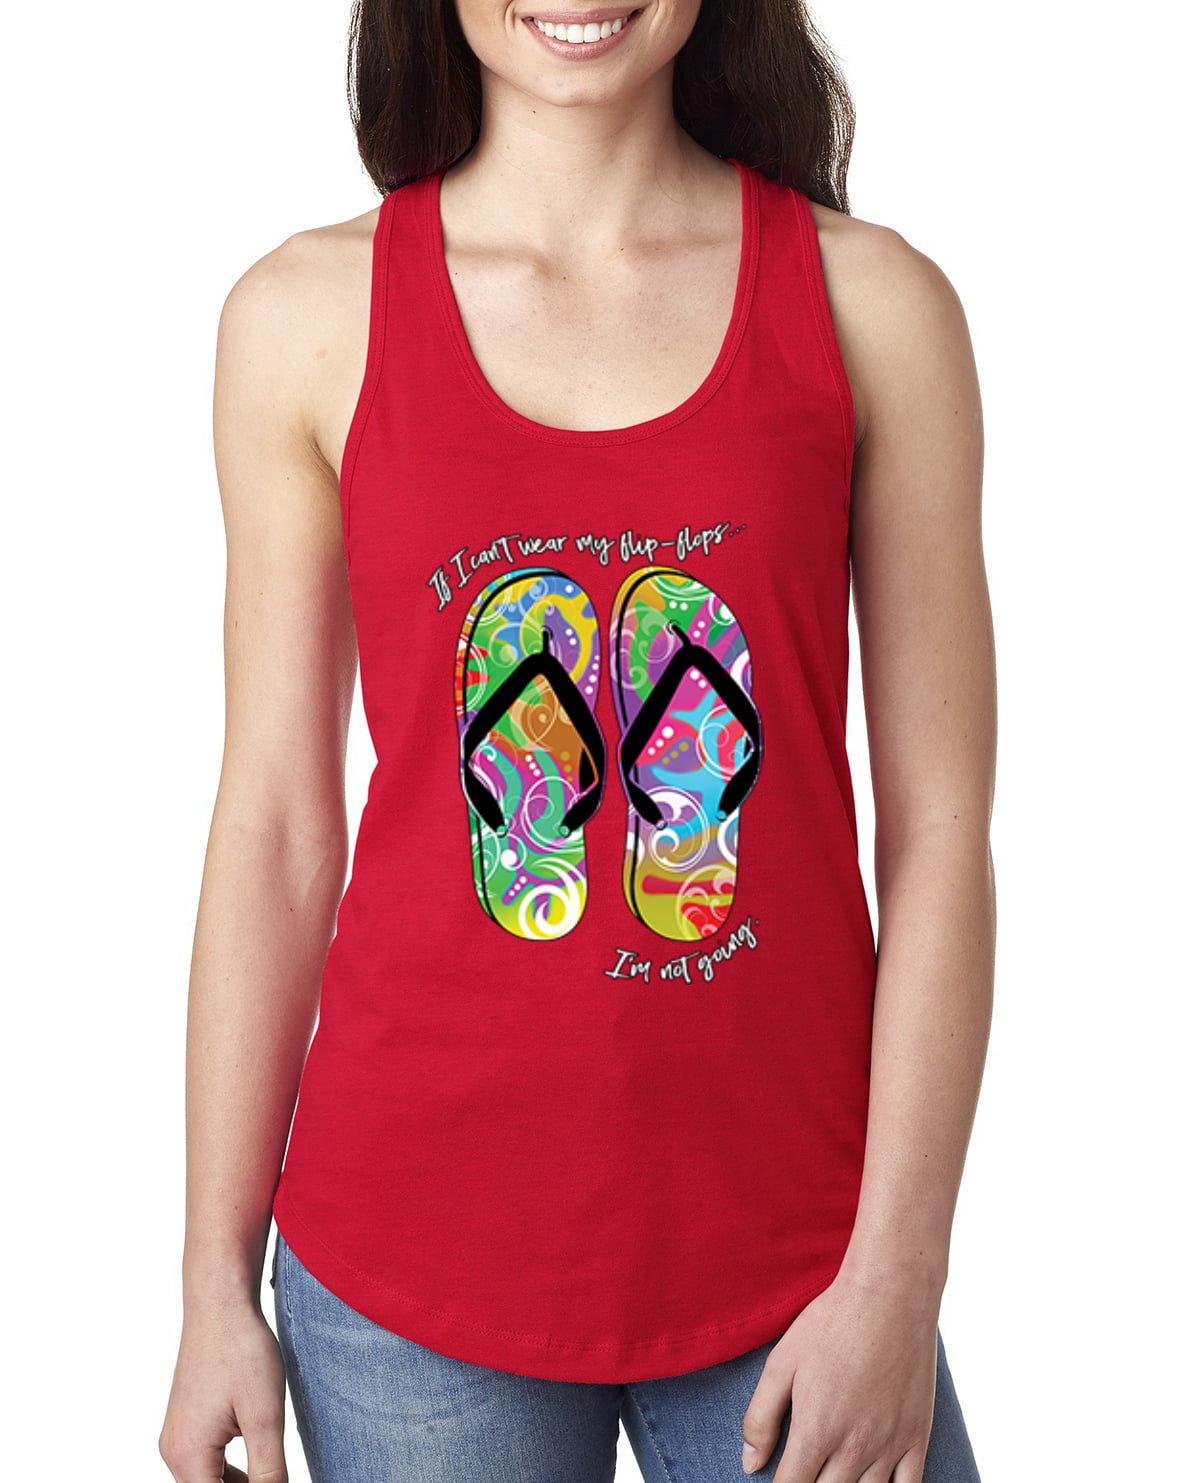 Campers Gonna Camp Neon Tank Top